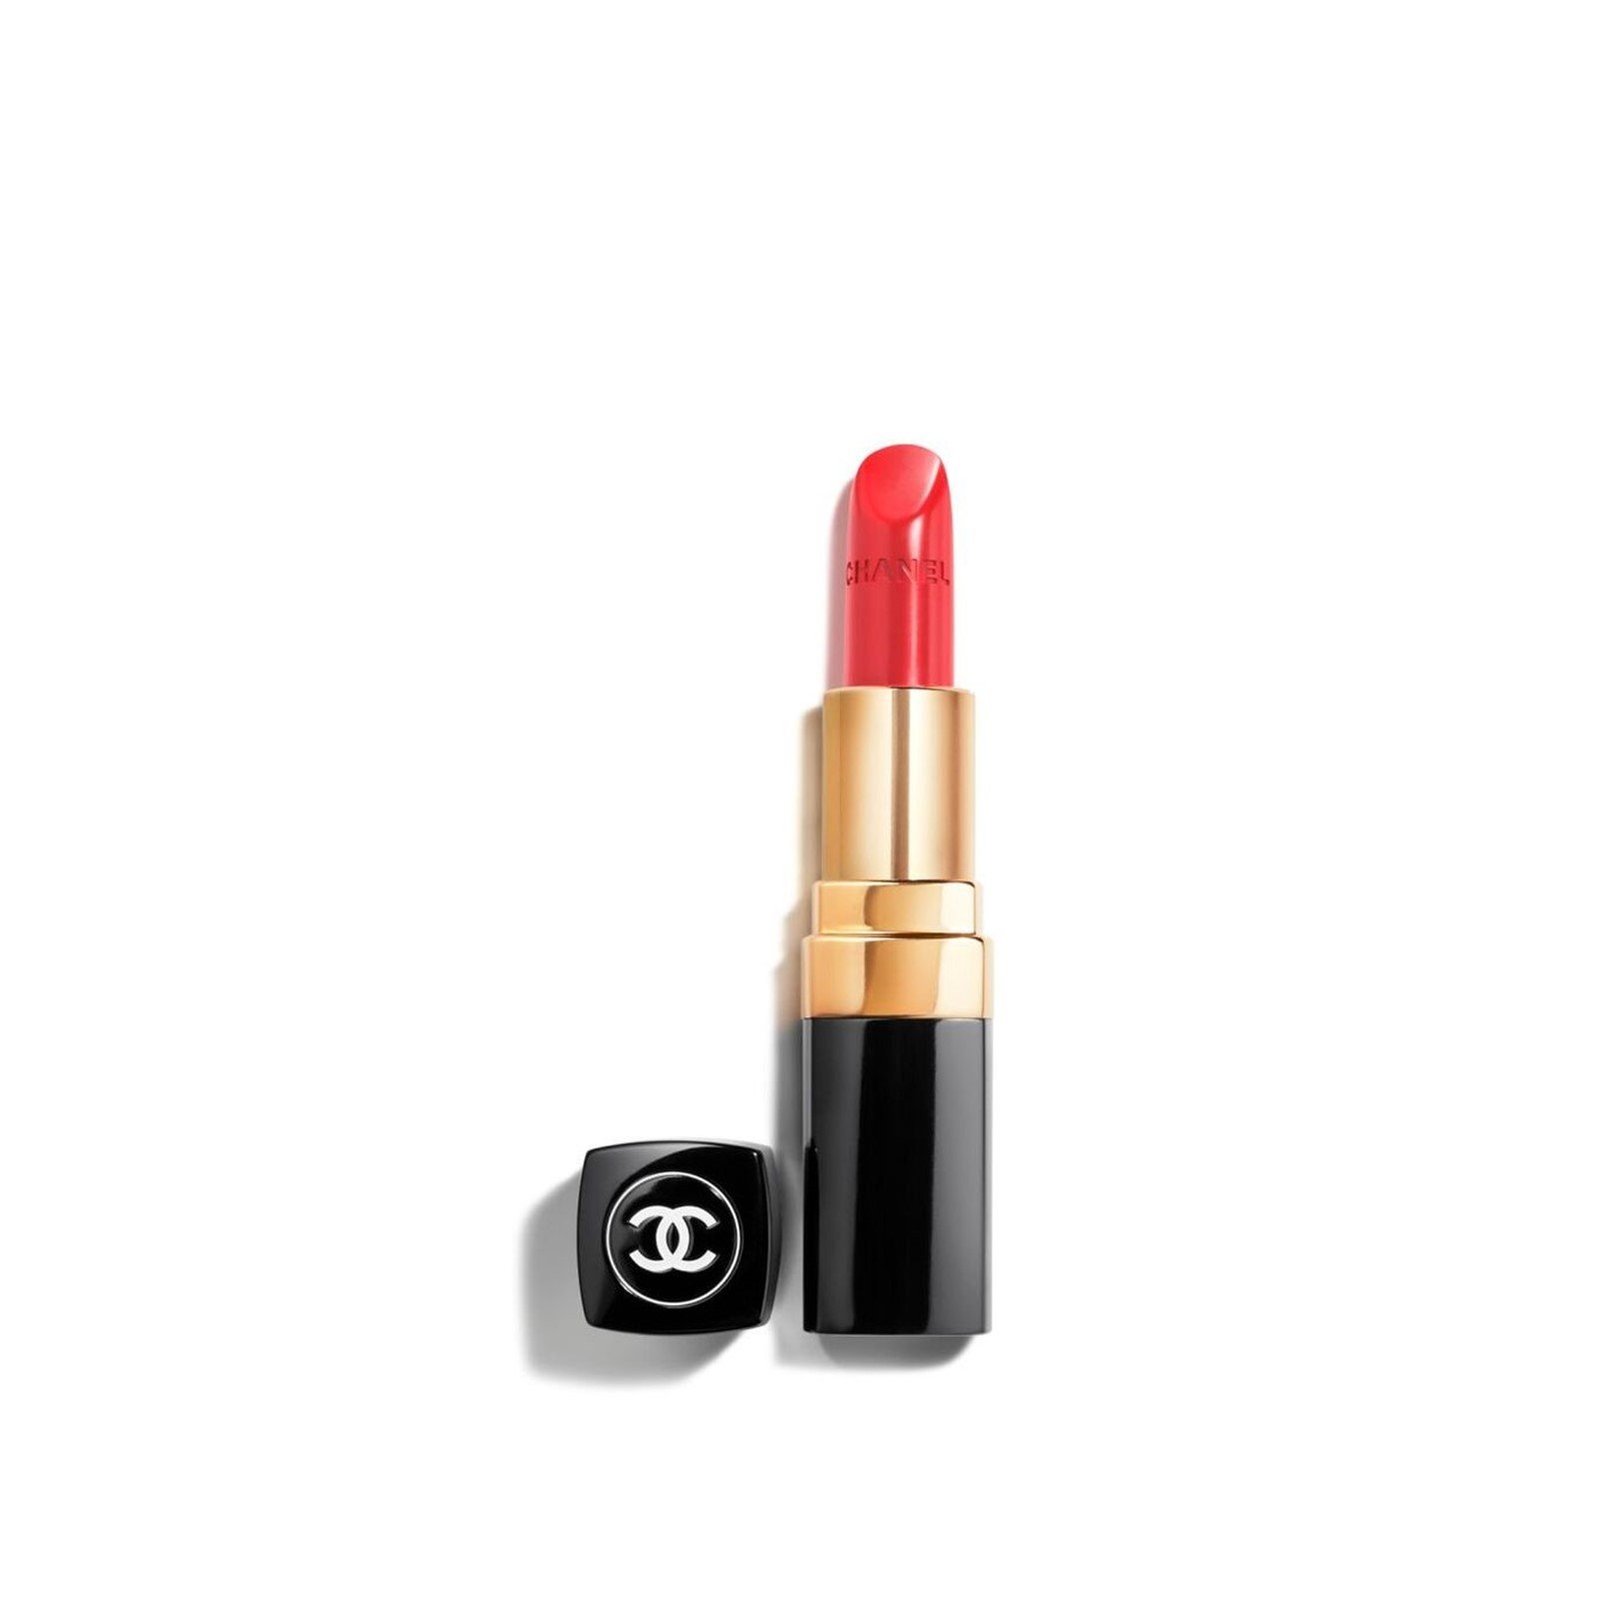 CHANEL Rouge Coco Ultra Hydrating Lip Colour 472 Experimental 3.5g (0.12oz)